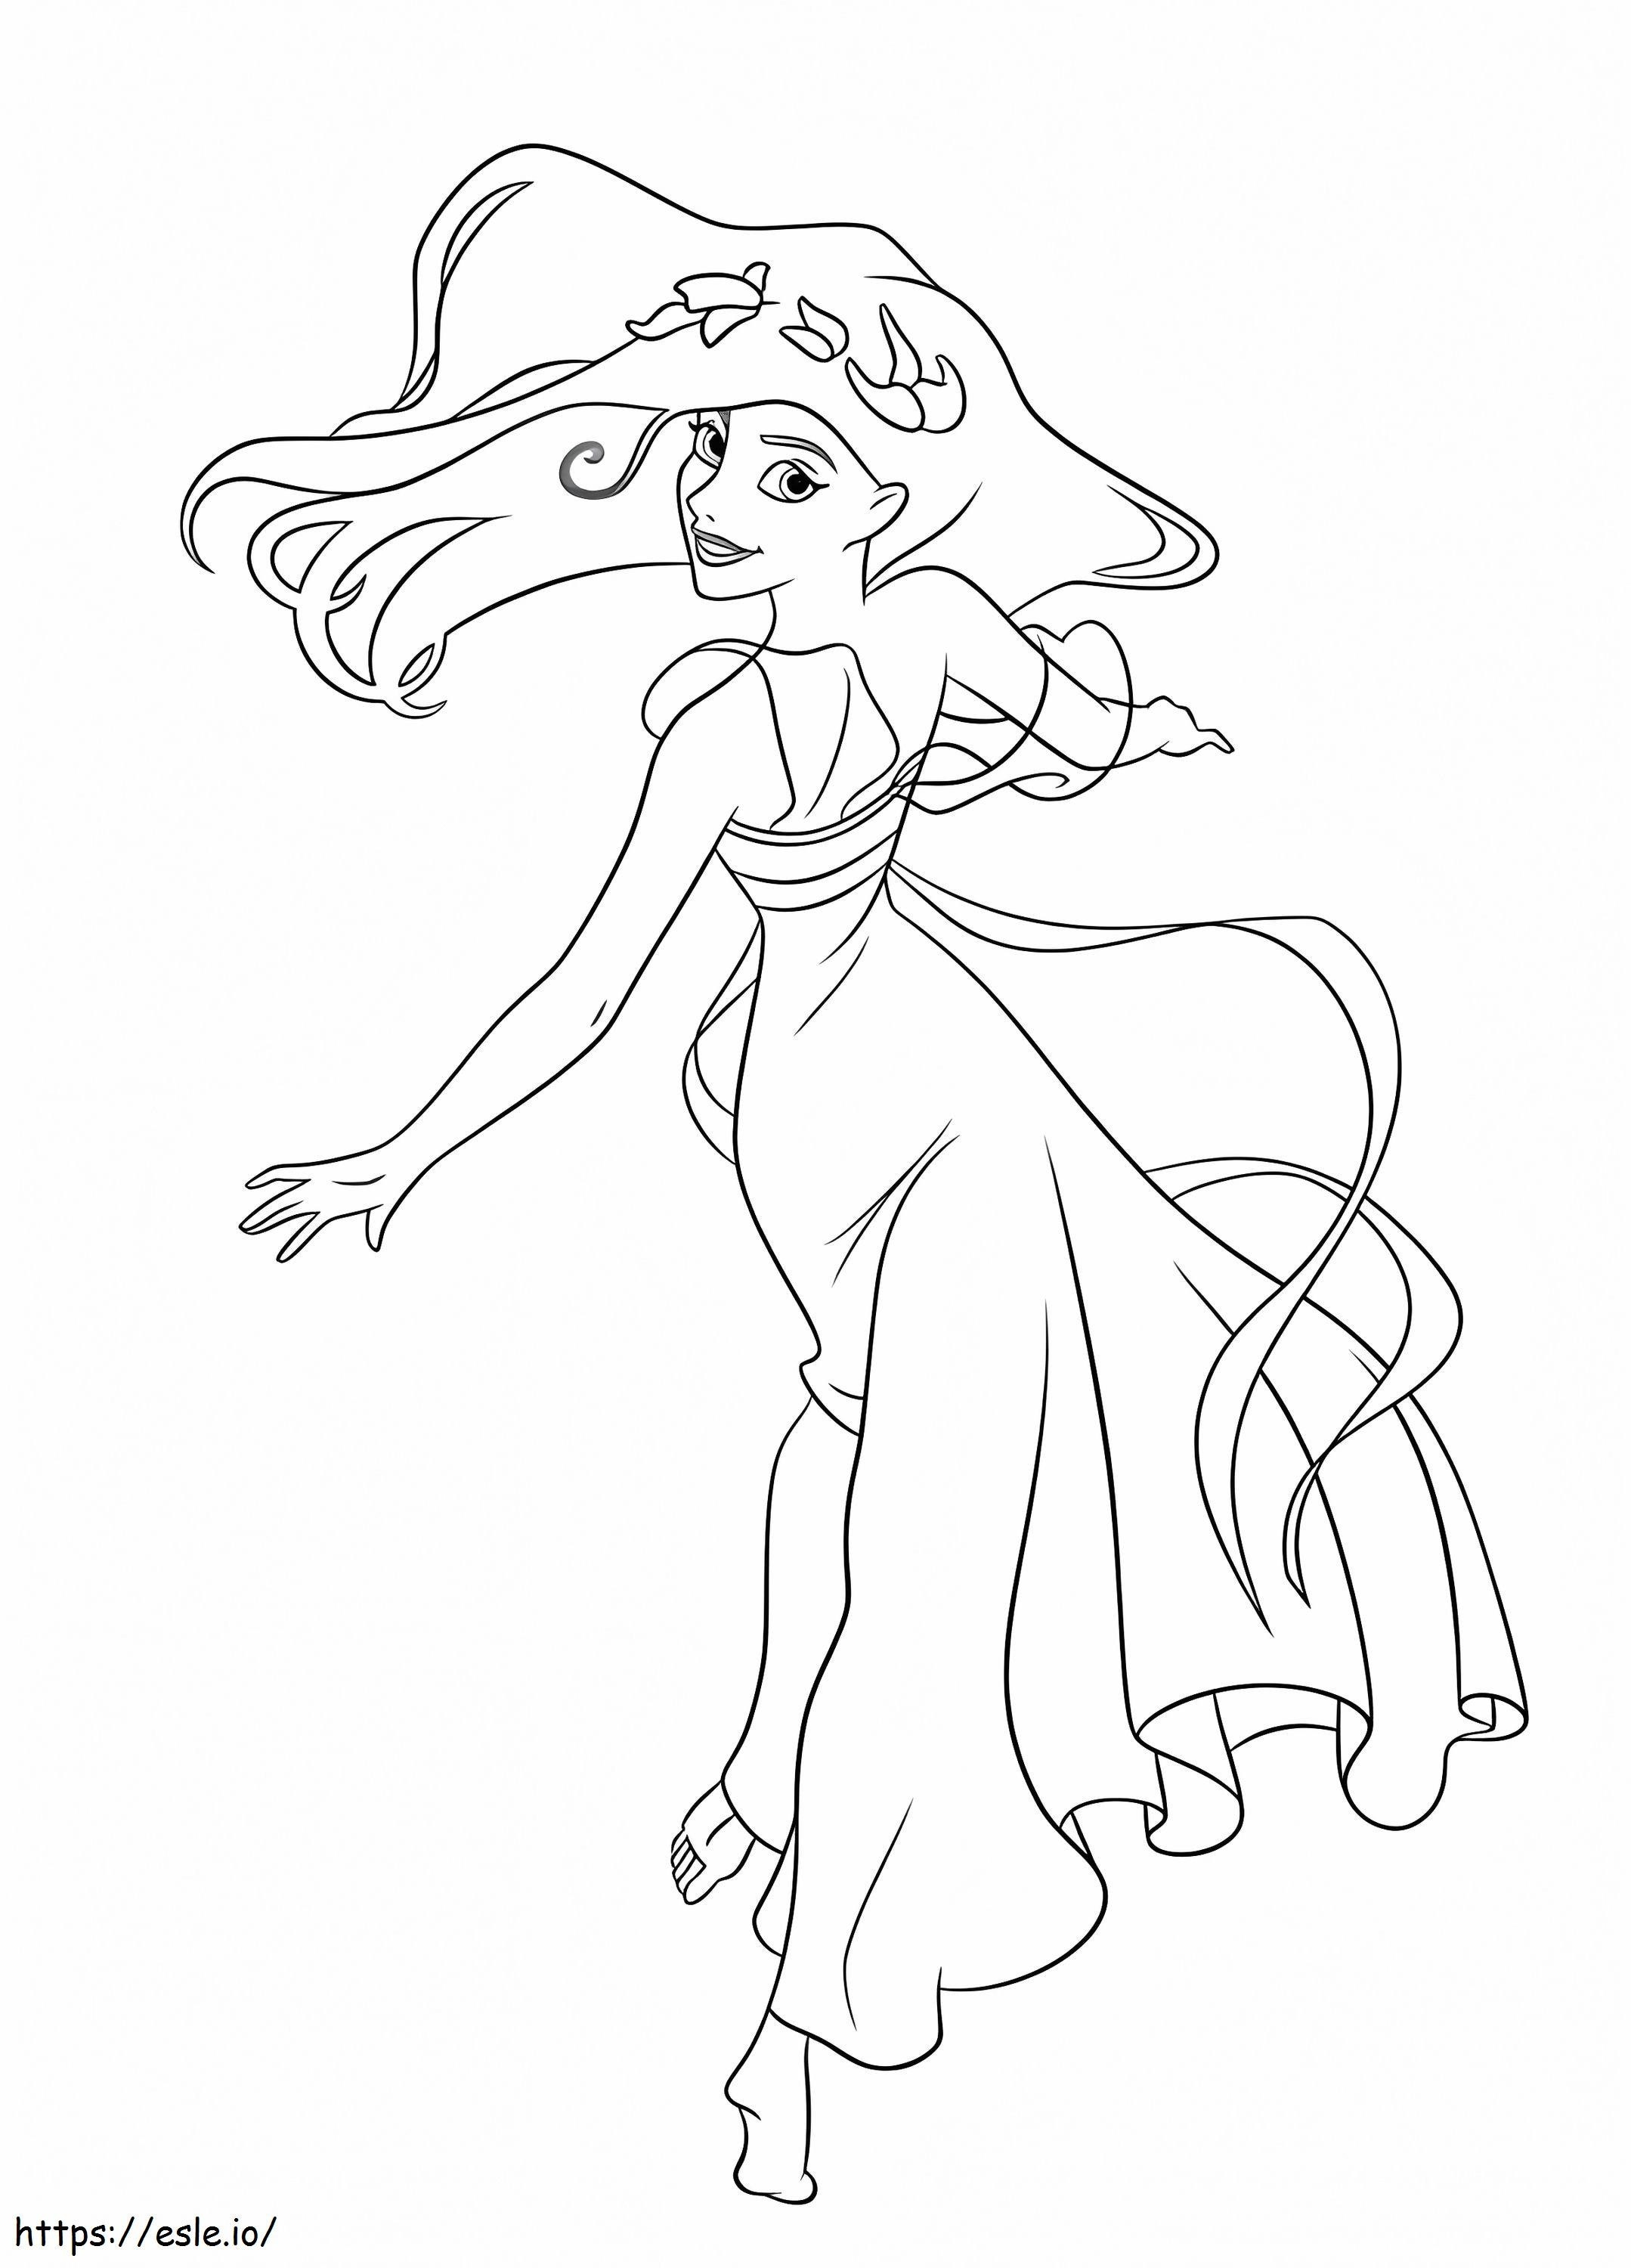 Lovely Giselle coloring page